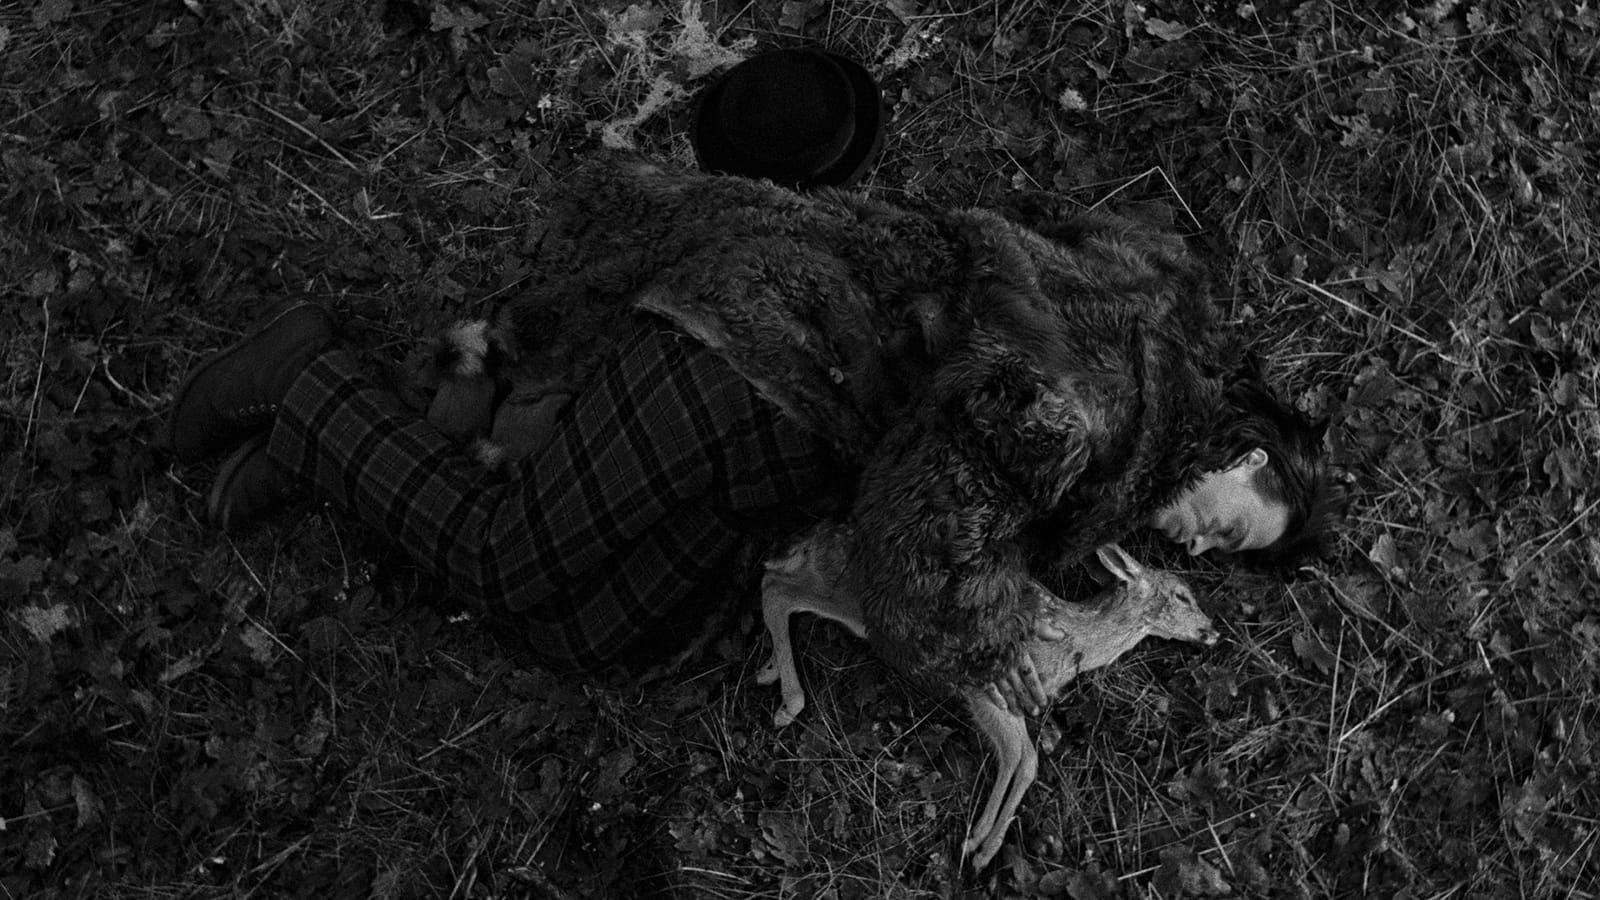 A man wearing a fur coat and tartan pants laying on the ground next to a deceased fawn in a cuddling position. 